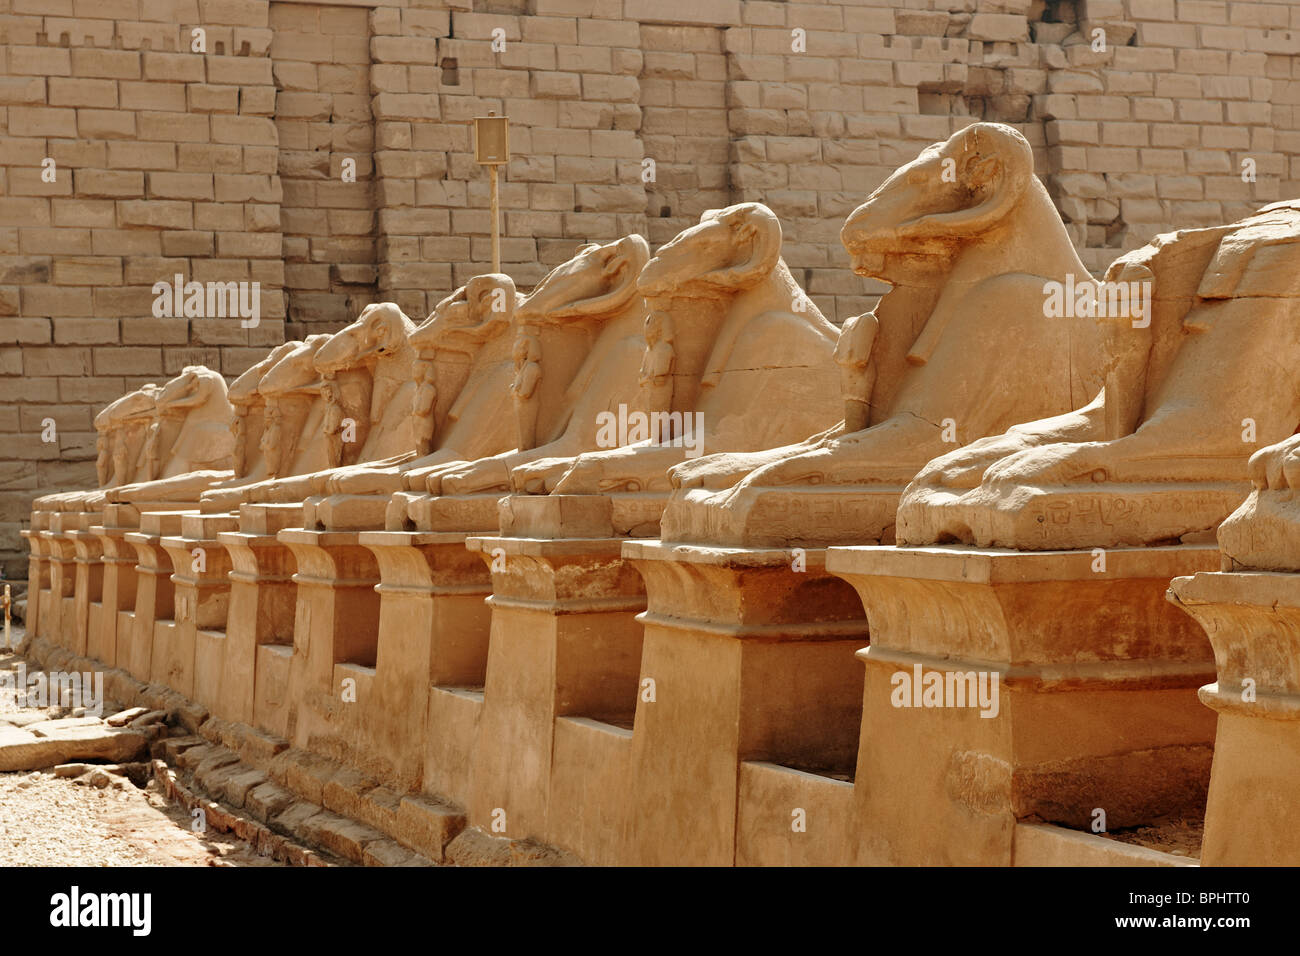 Corridor of ram-headed sphinxes at entrance of Karnak Temple Complex, Luxor, Thebes, Egypt, Arabia, Africa Stock Photo